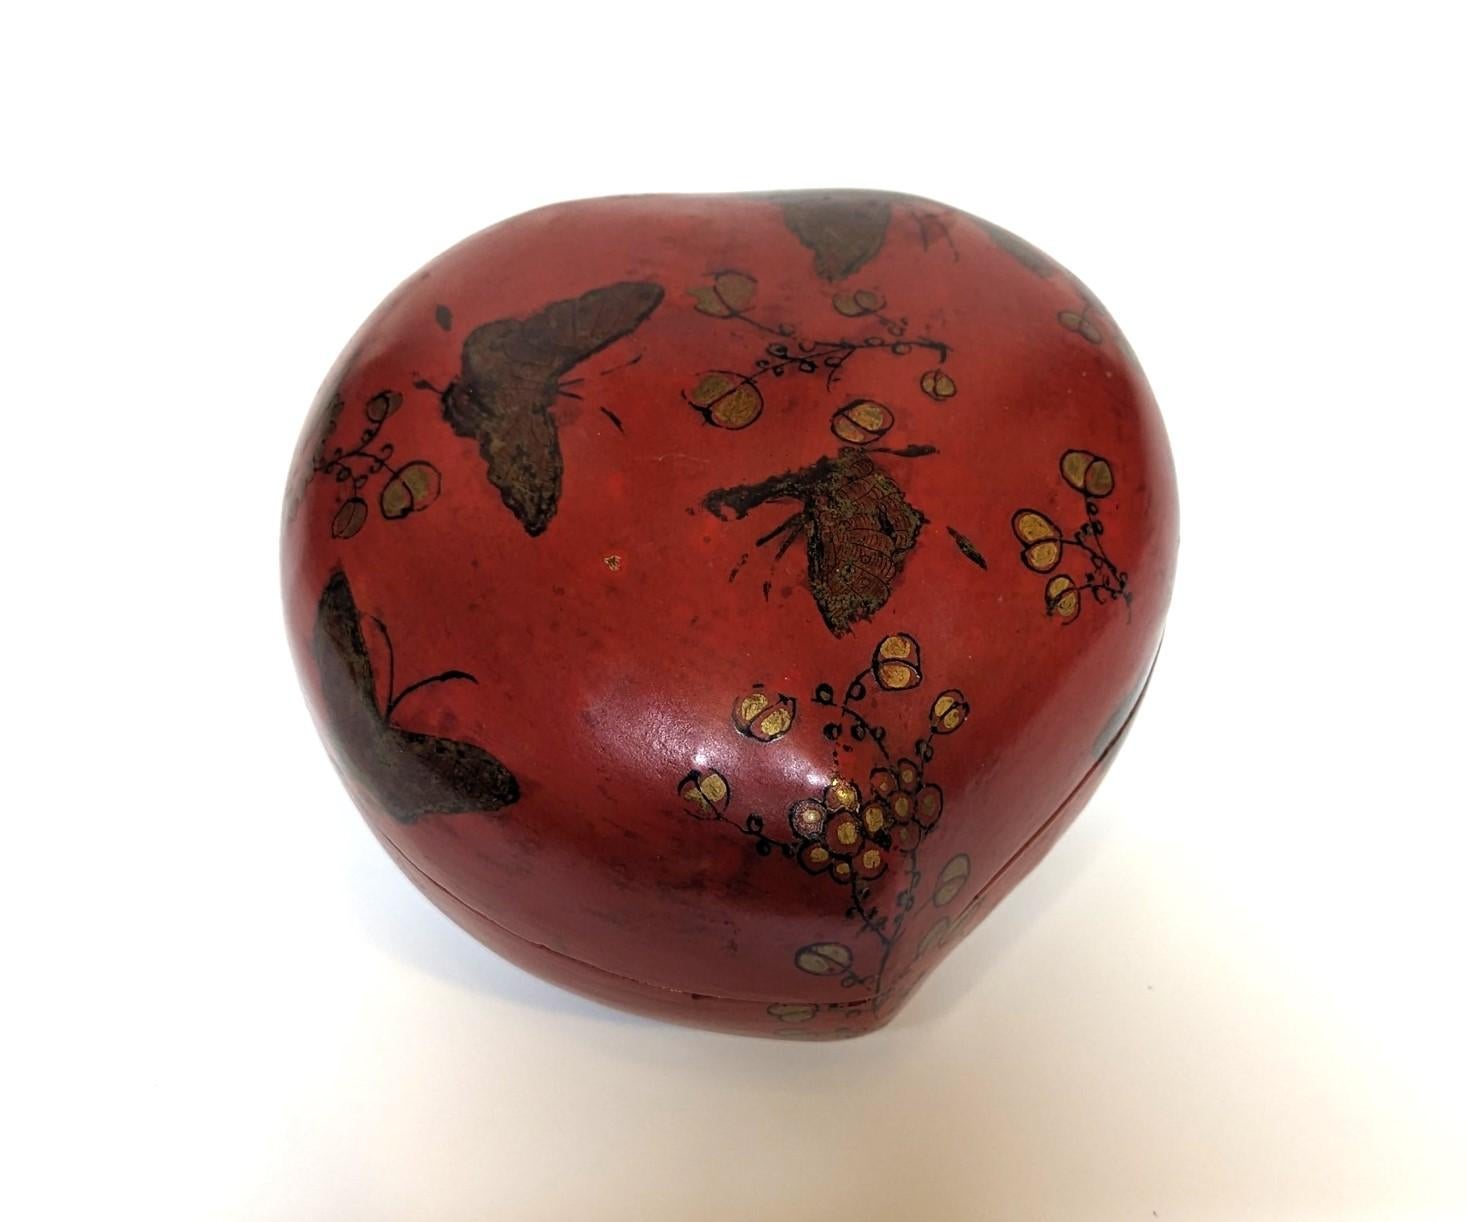 Vintage Heart Shaped Chinoiserie Jewelry Box.  A beautiful hand made heart shaped box with Chinoiserie hand painted decoration of butterfly's and nectar flower buds.  The box is made of wood with papier-mâché and wood ash paste then fine sanded to a